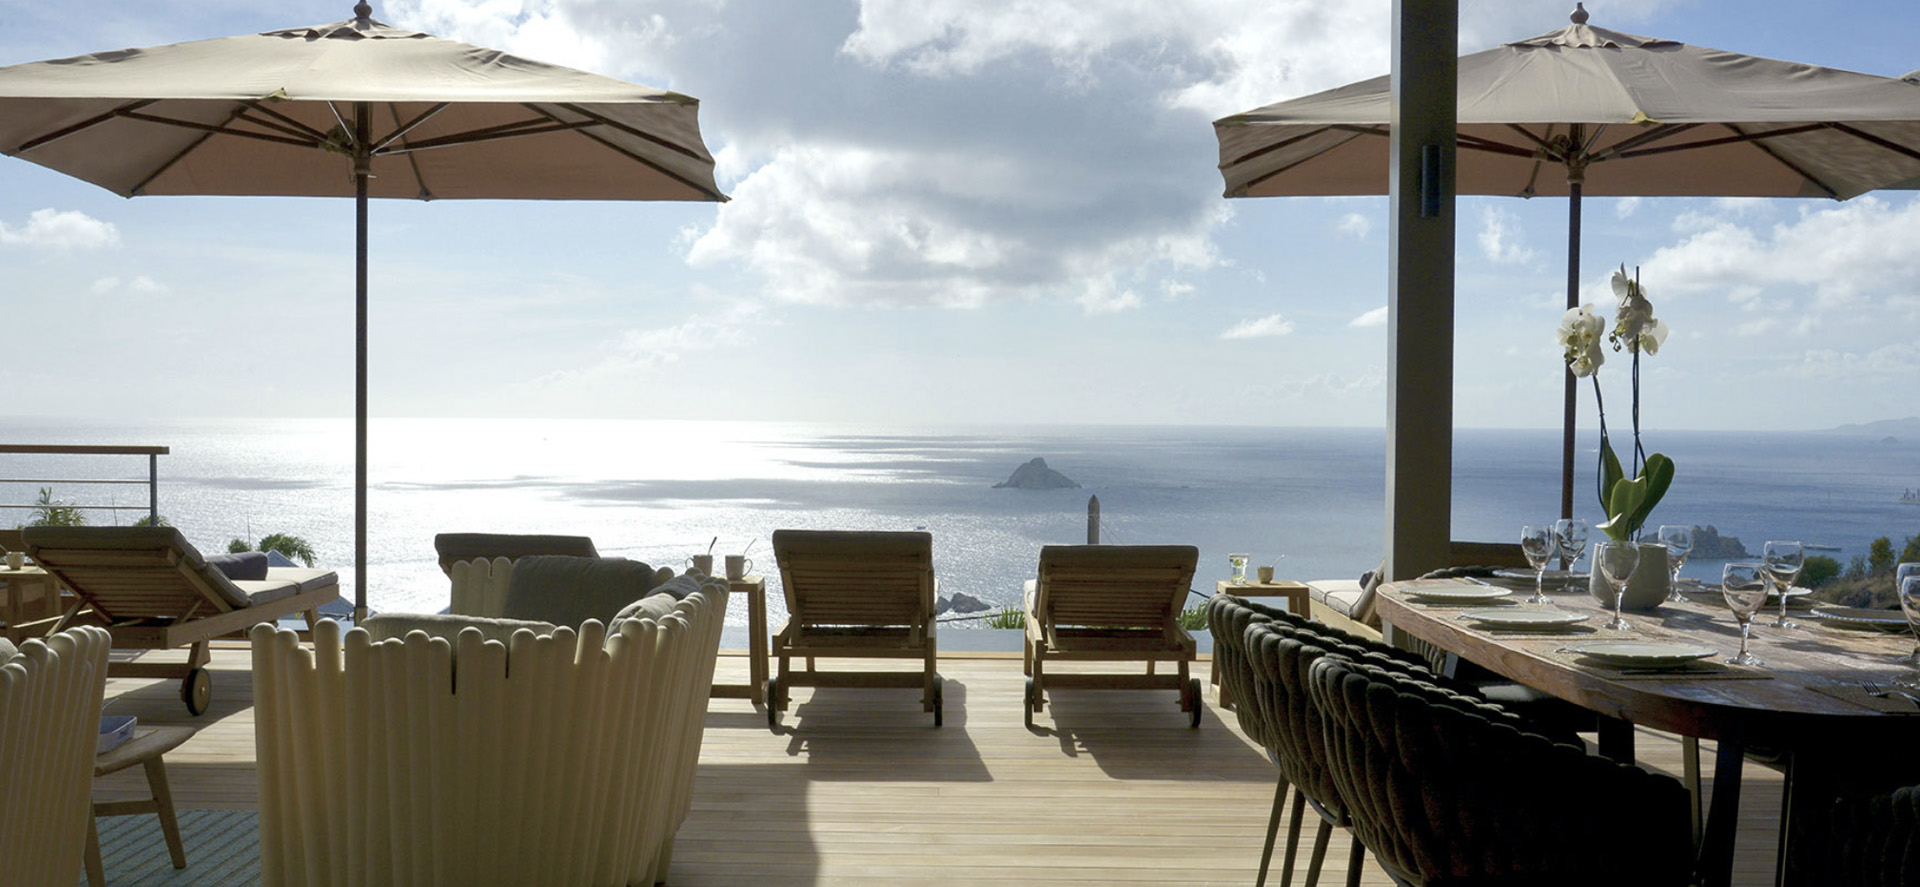 Living in St Barts - 7th Heaven Properties